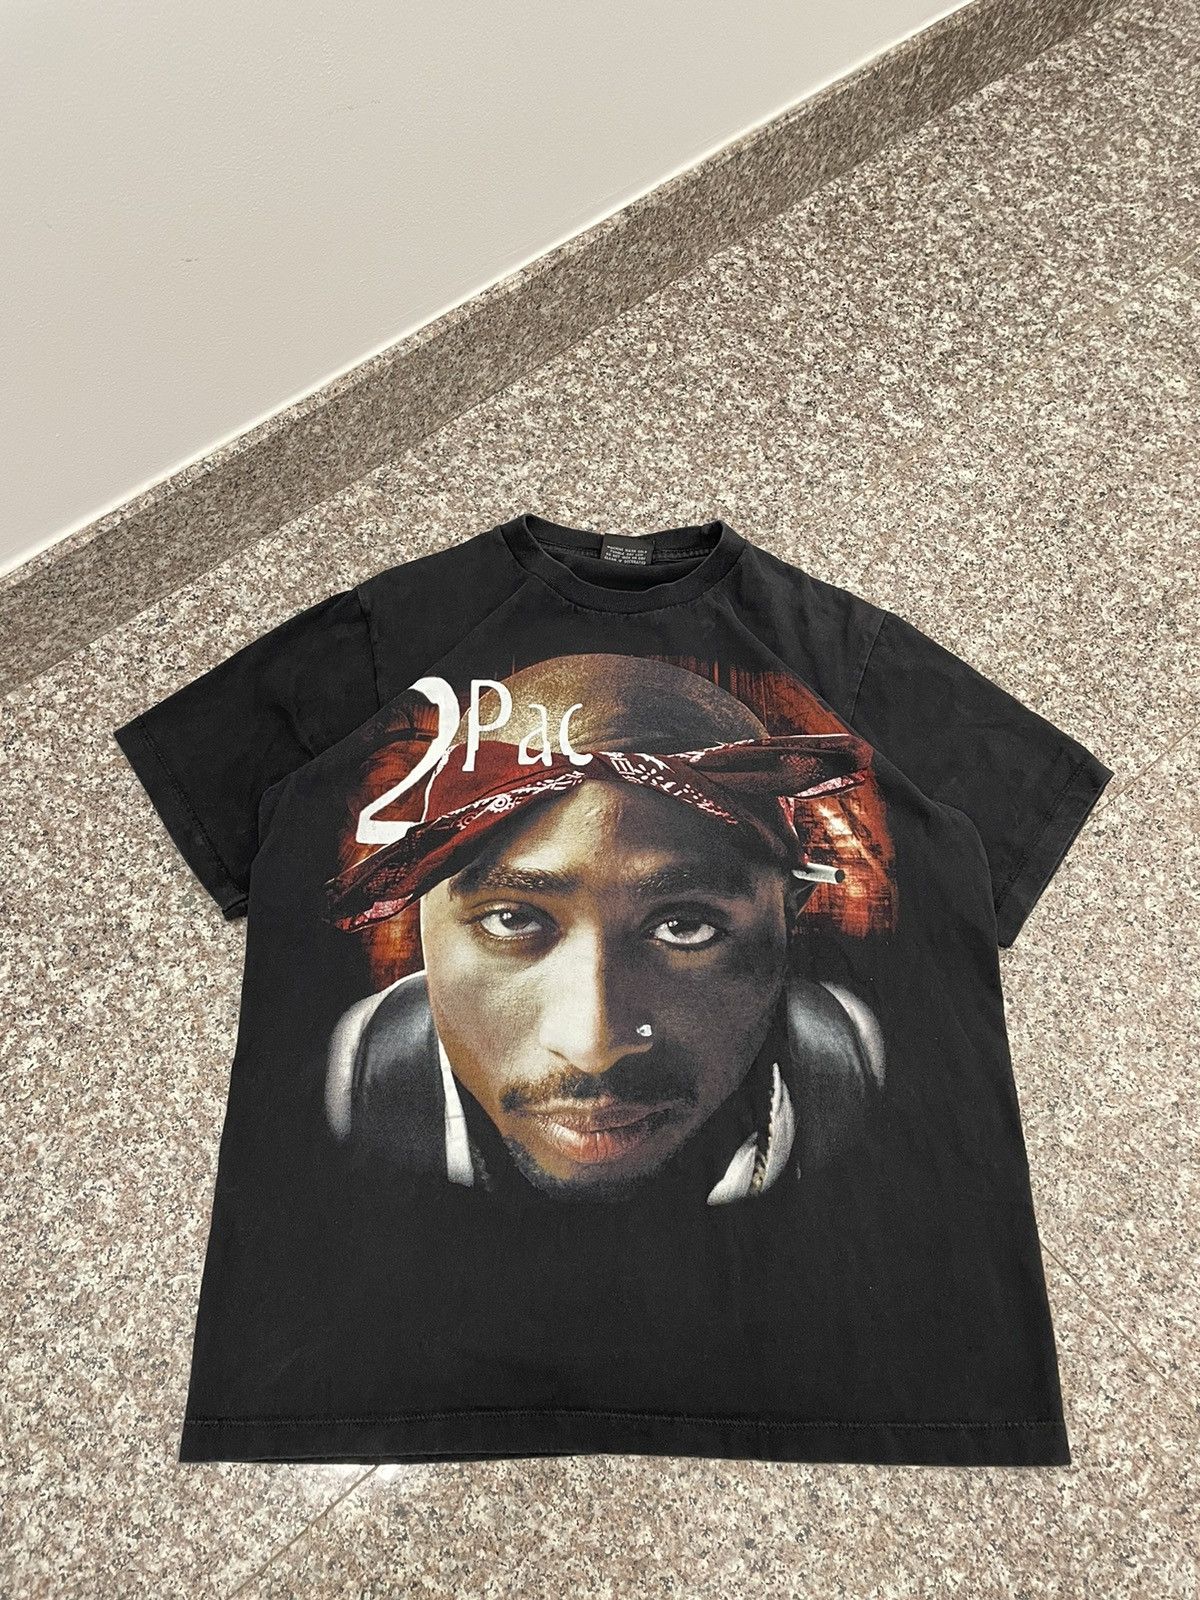 Pre-owned Band Tees X Rap Tees Vintage 90's 2pac Rap T-shirt Hip Hop Crazy In Black